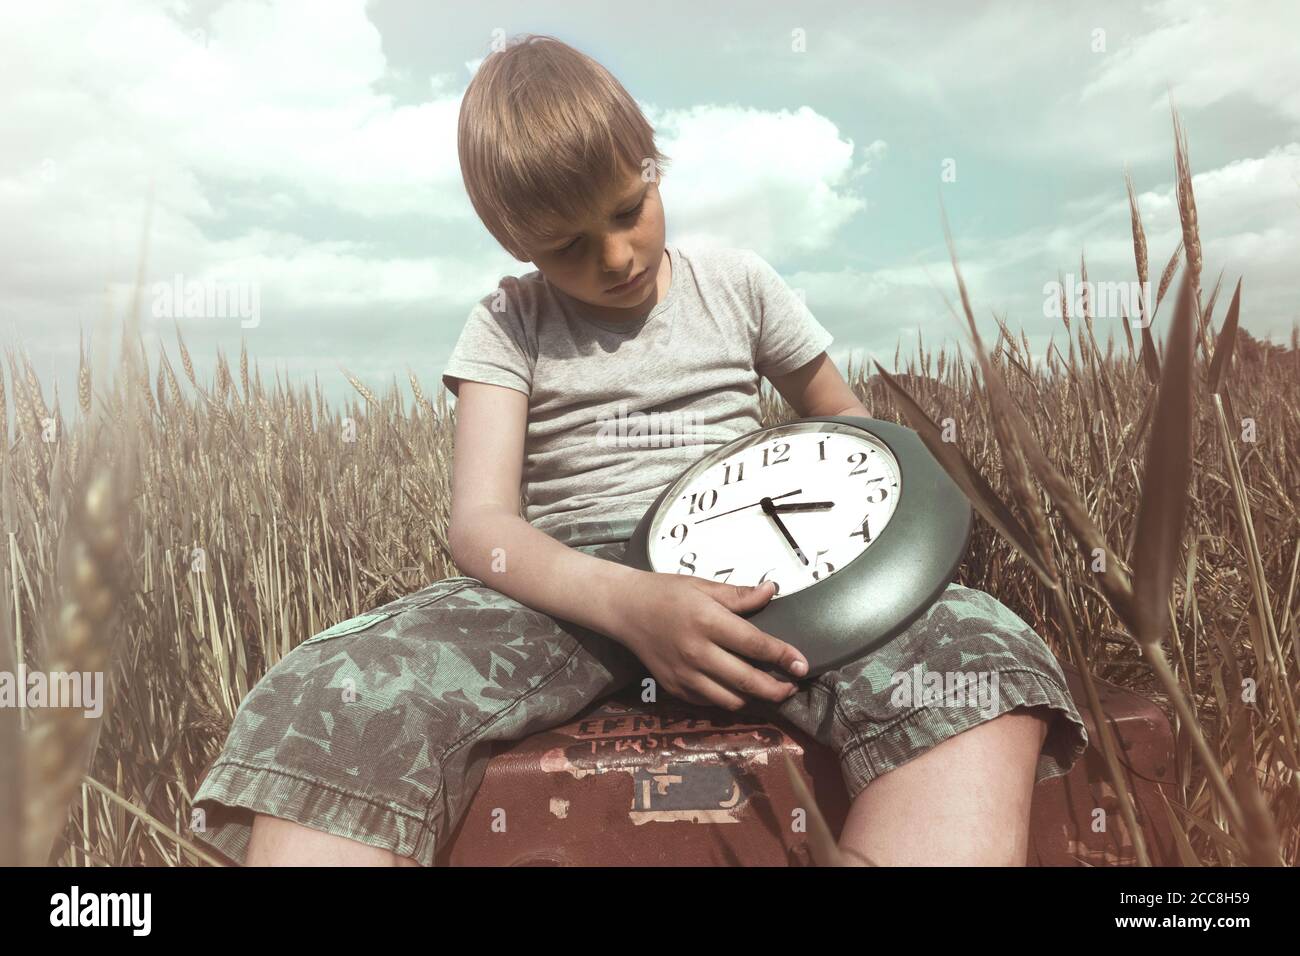 Young boy has the power to control the time Stock Photo